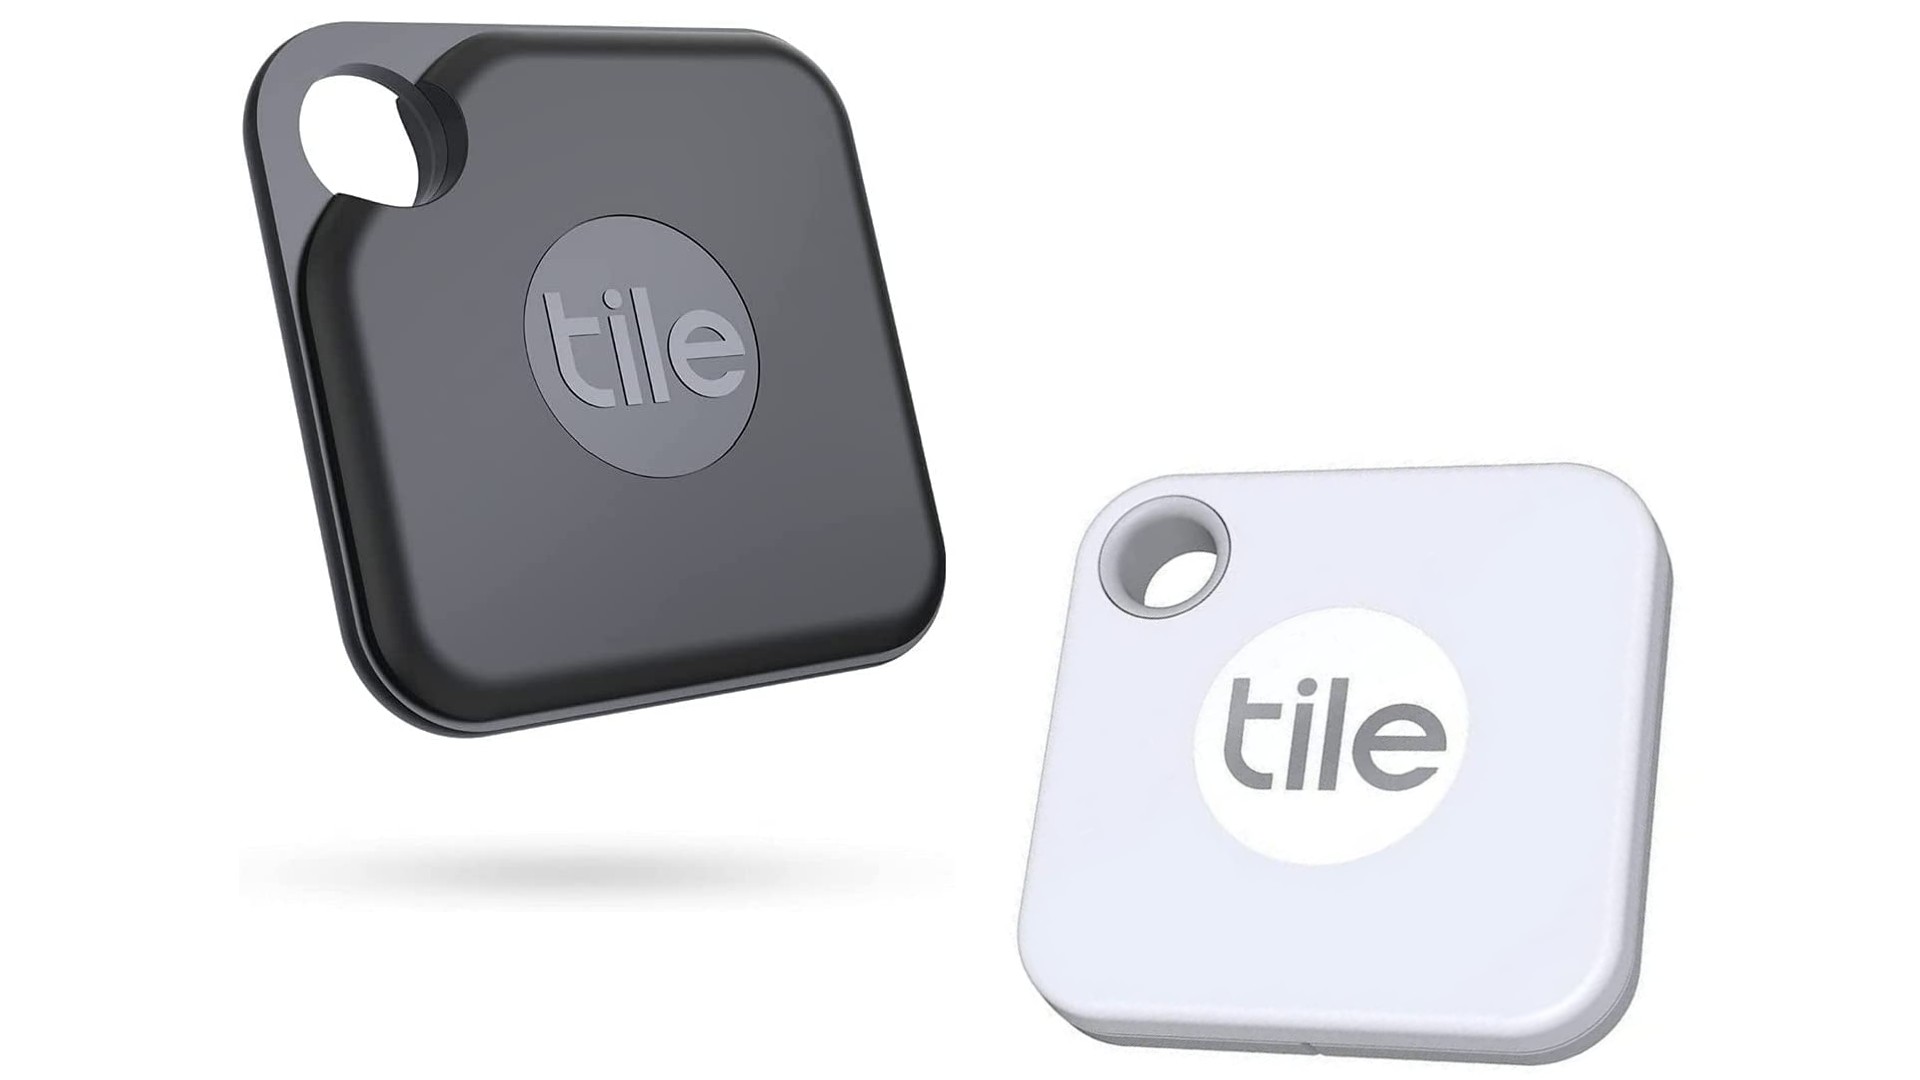 Tile Pro Black & Tile Mate White (2020) Combo - High Performance Bluetooth Tracker, Keys Finder and Item Locator for Keys, and More; Up To 400 ft Range, Water Resistance and 1 Year Replaceable Battery - image 1 of 5